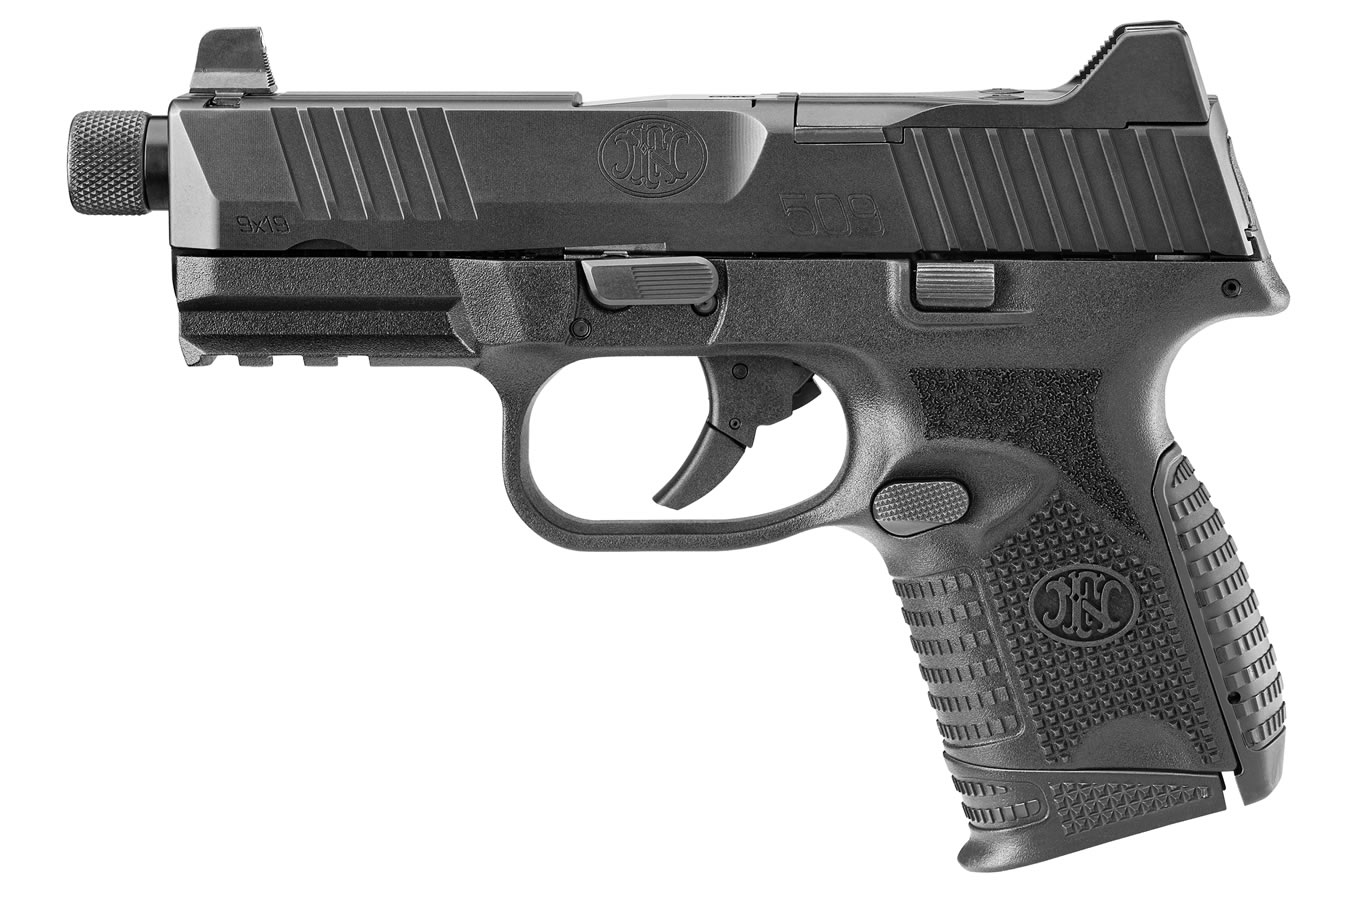 fnh-fn-509-compact-tactical-9mm-black-pistol-vance-outdoors